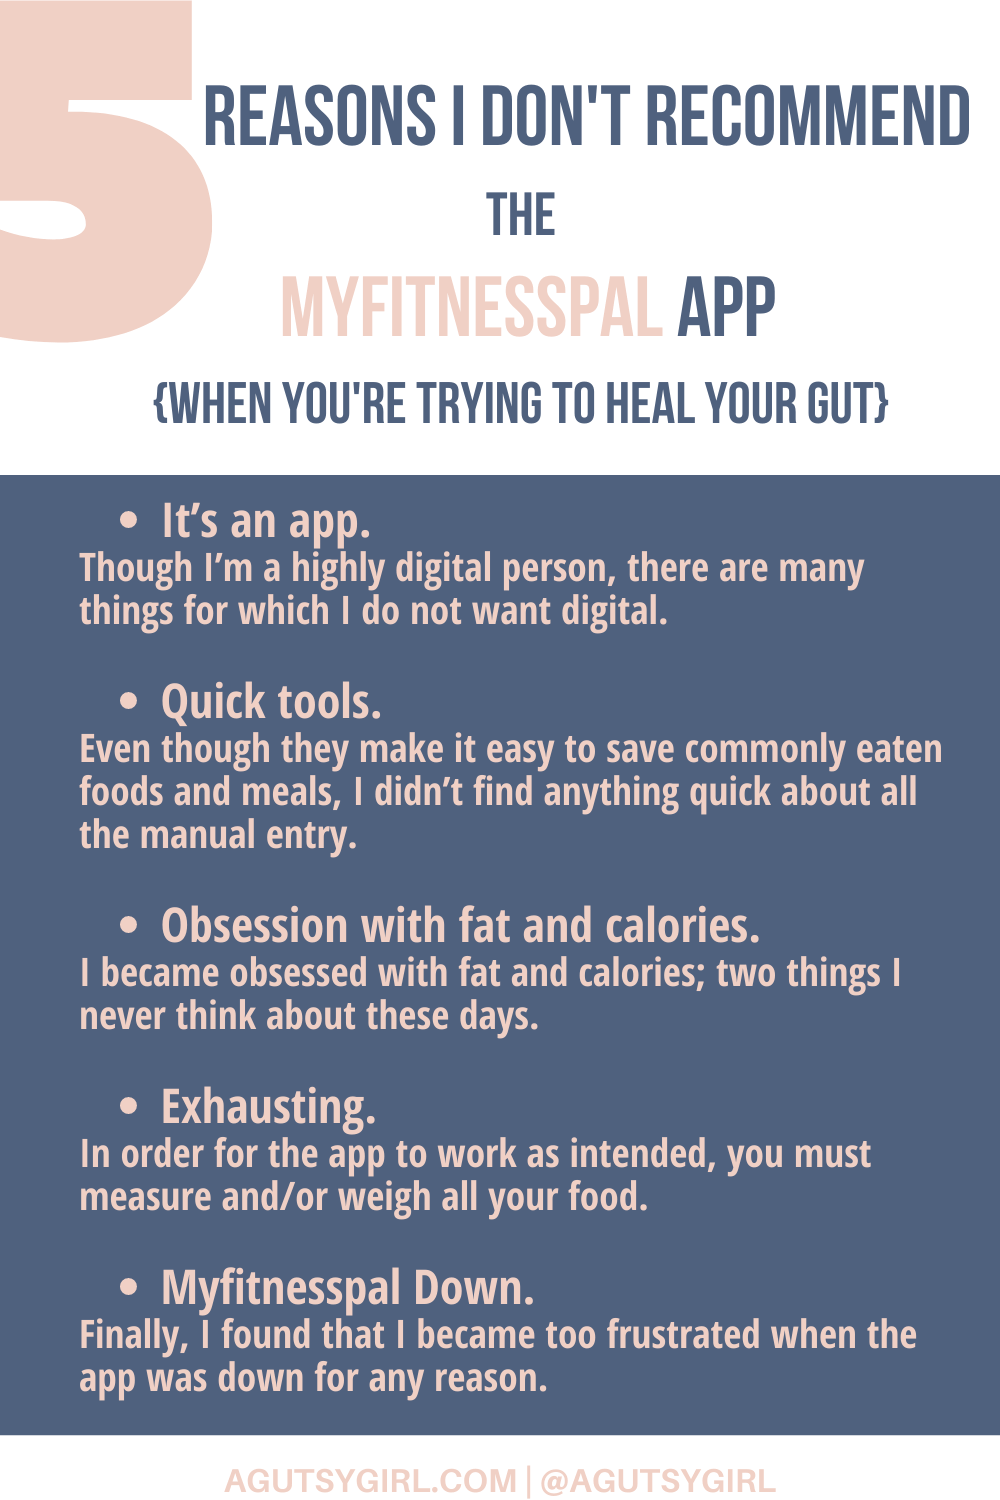 5 Reasons I Don't Recommend the myfitnesspalapp agutsygirl.com #myfitnesspal #myfitnesspalapp #guthealing